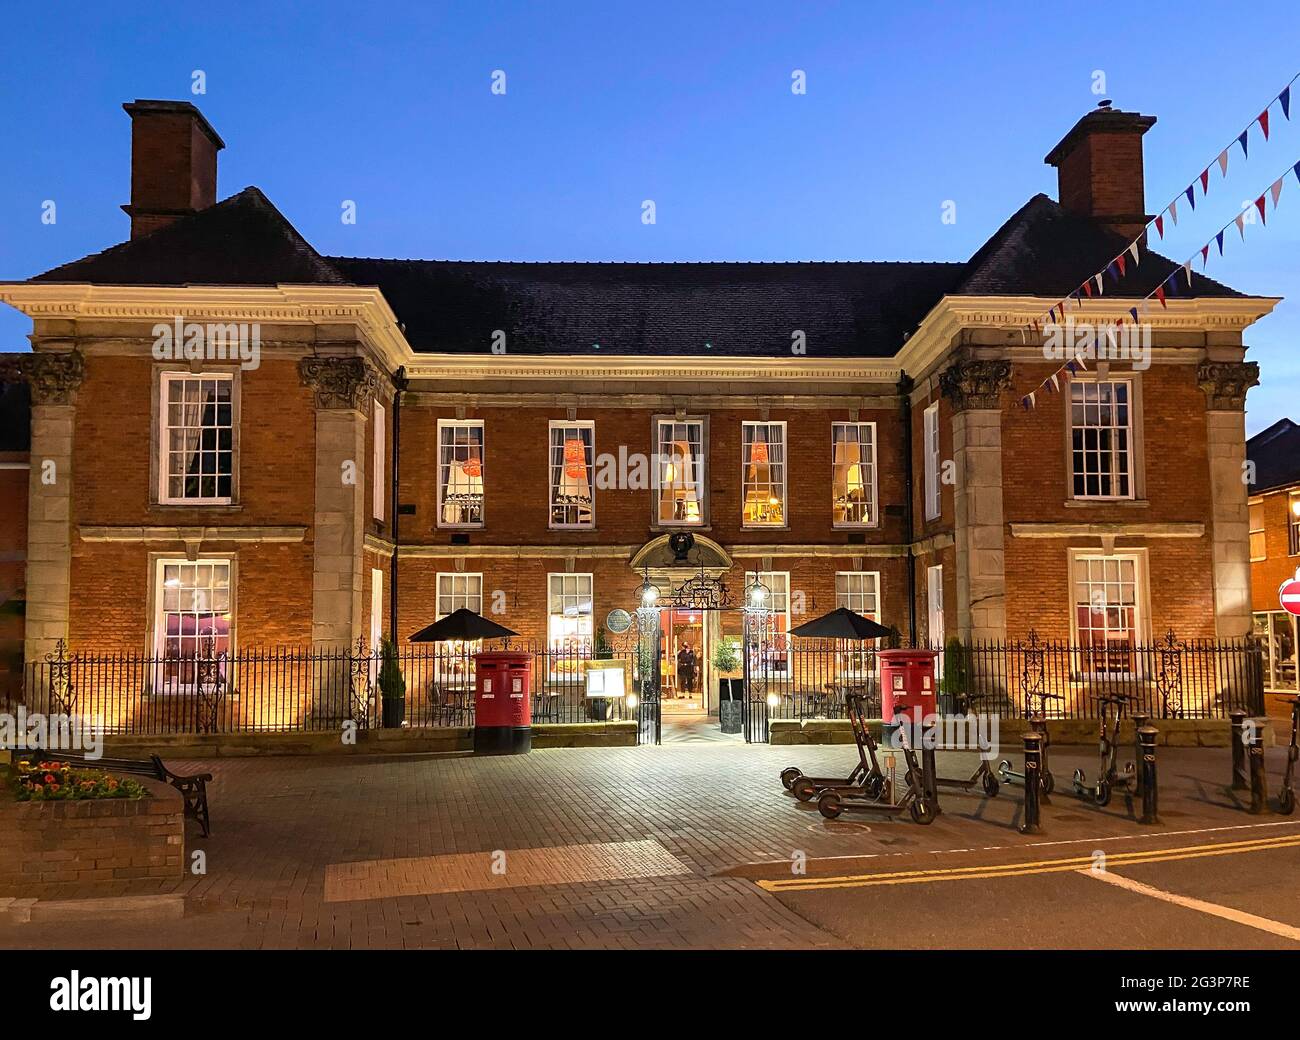 The Post House Bar & Grill at dusk, Greengate Street, Stafford, Staffordshire, England, United Kingdom Stock Photo